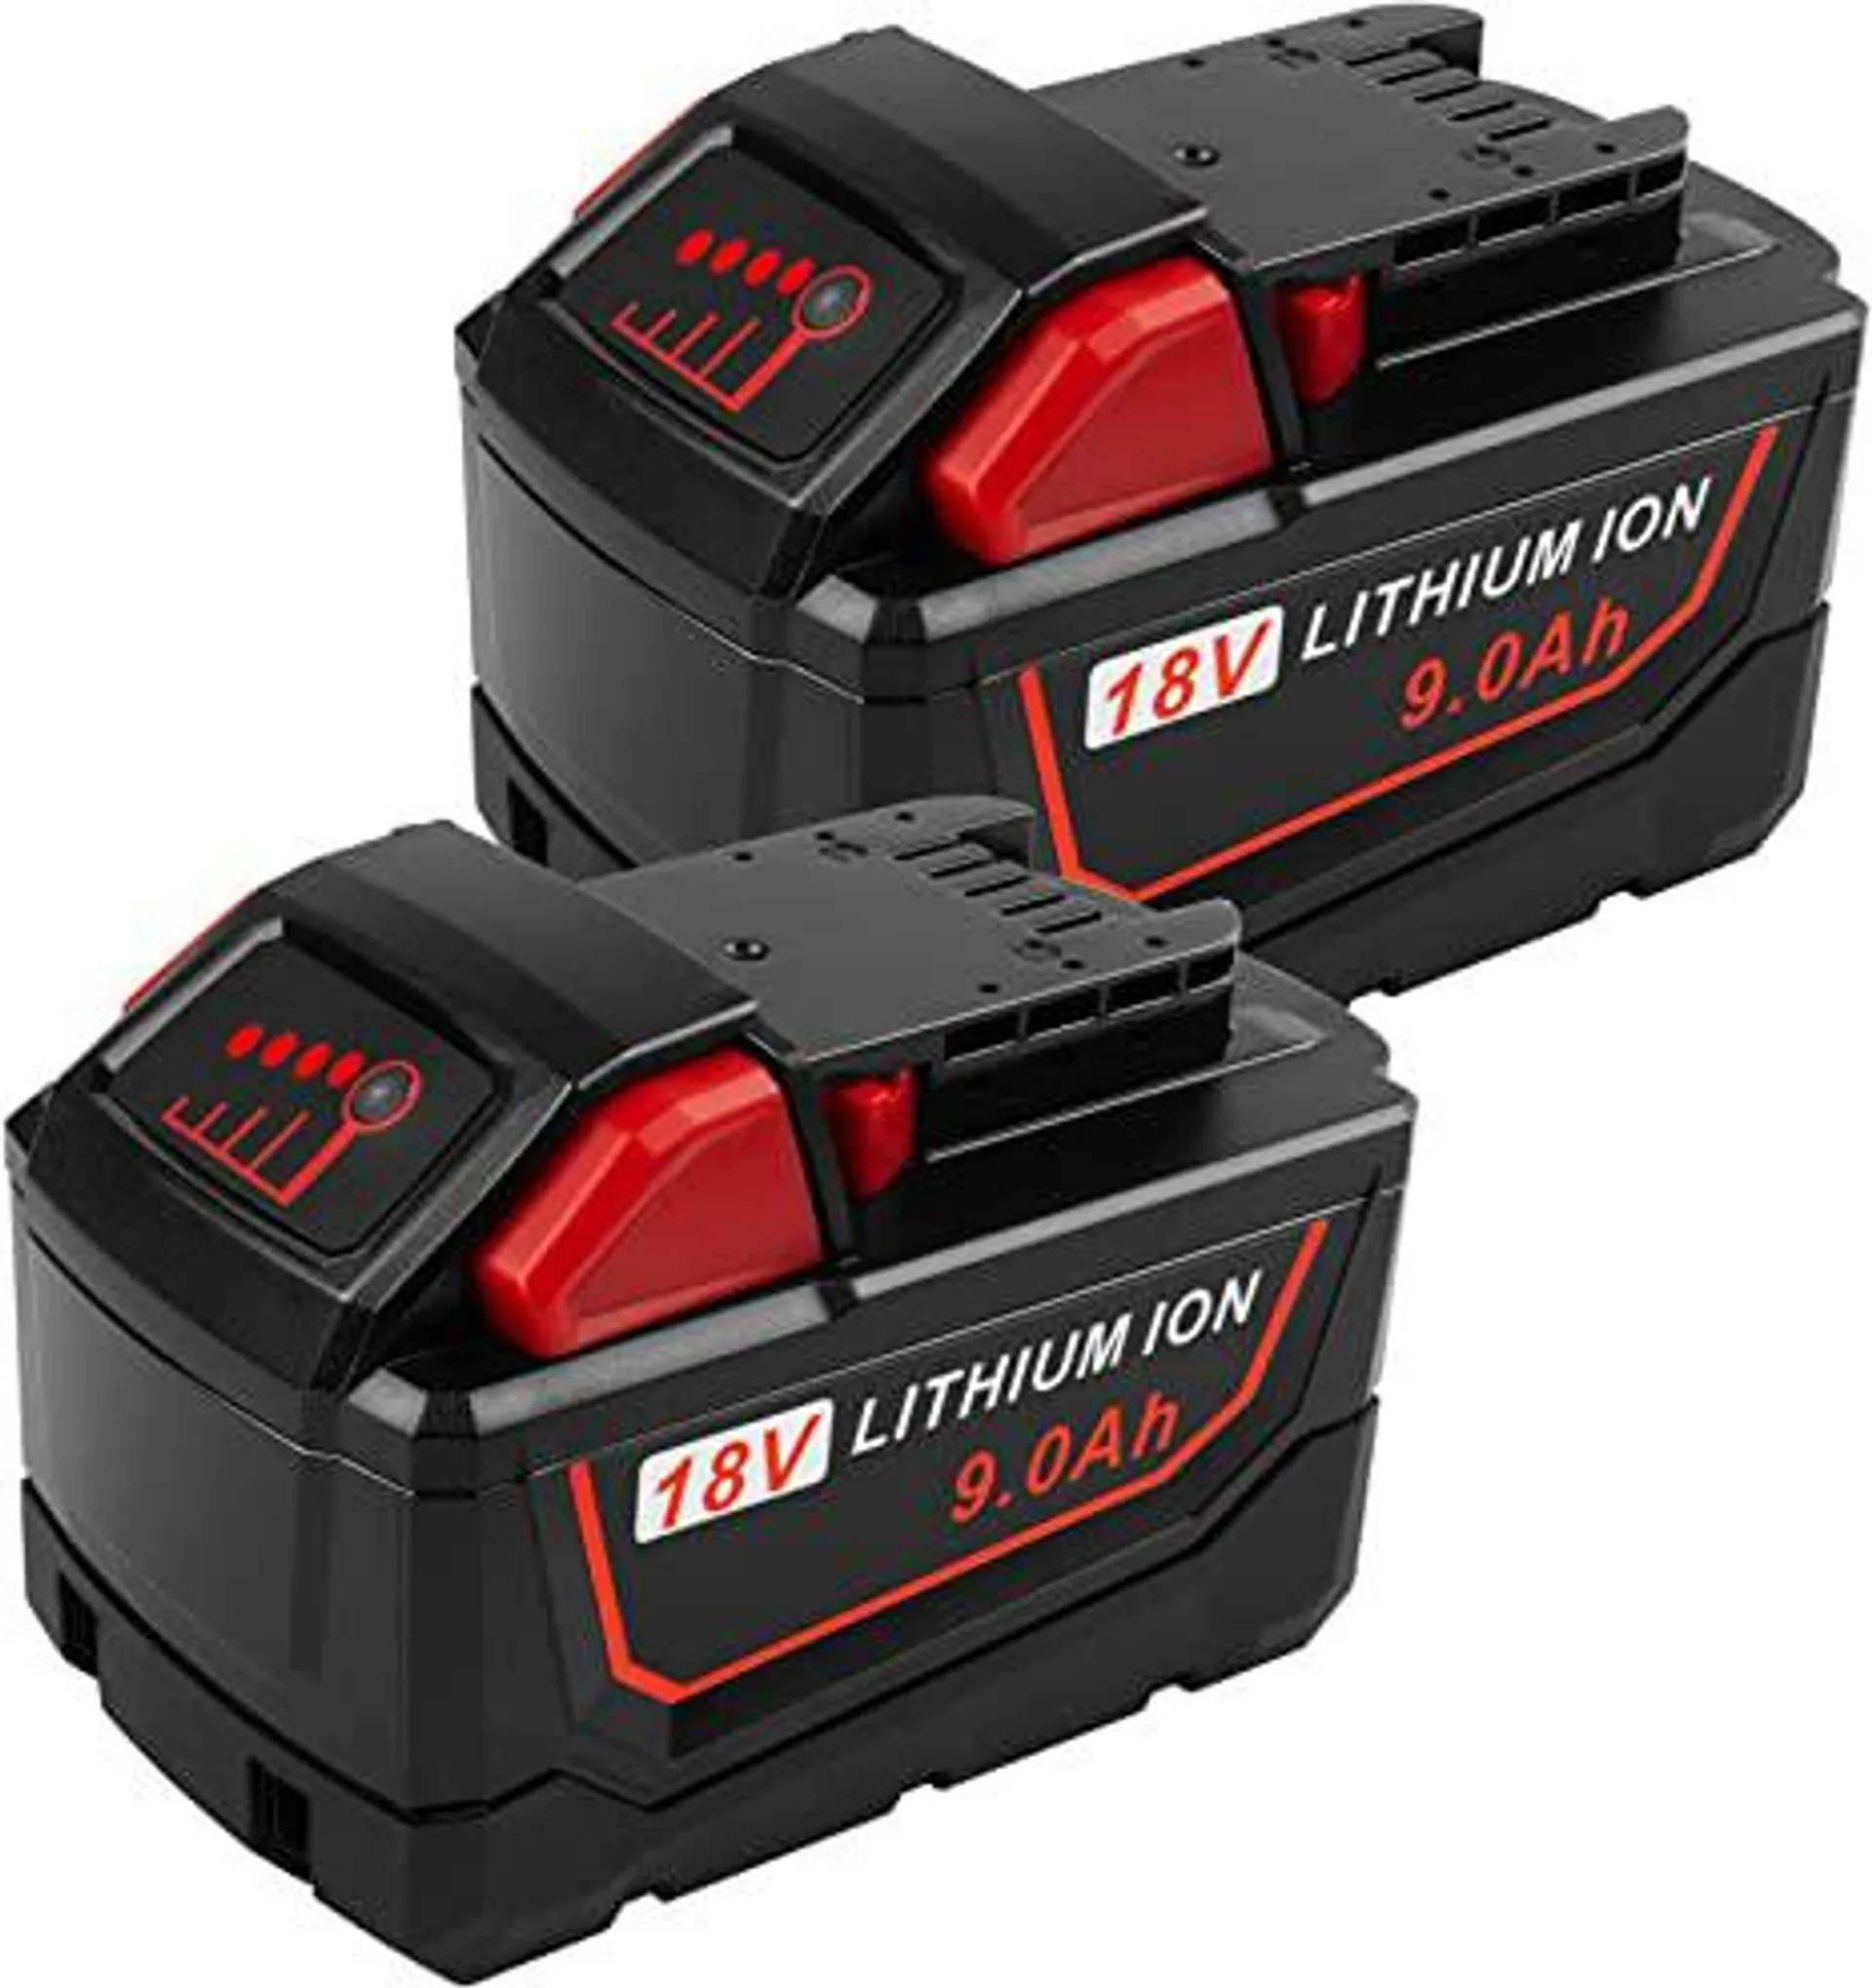 [2Pack] High Output 6.0Ah 18V M18 Lithium ion Battery for Milwaukee M18B Xc 48-11-1850 48-11-1815 48-11-1820 48-11-1852 48-11-1828 48-11-1822 48-11-1811 48-11-1840 48-11-1860 48-11-10